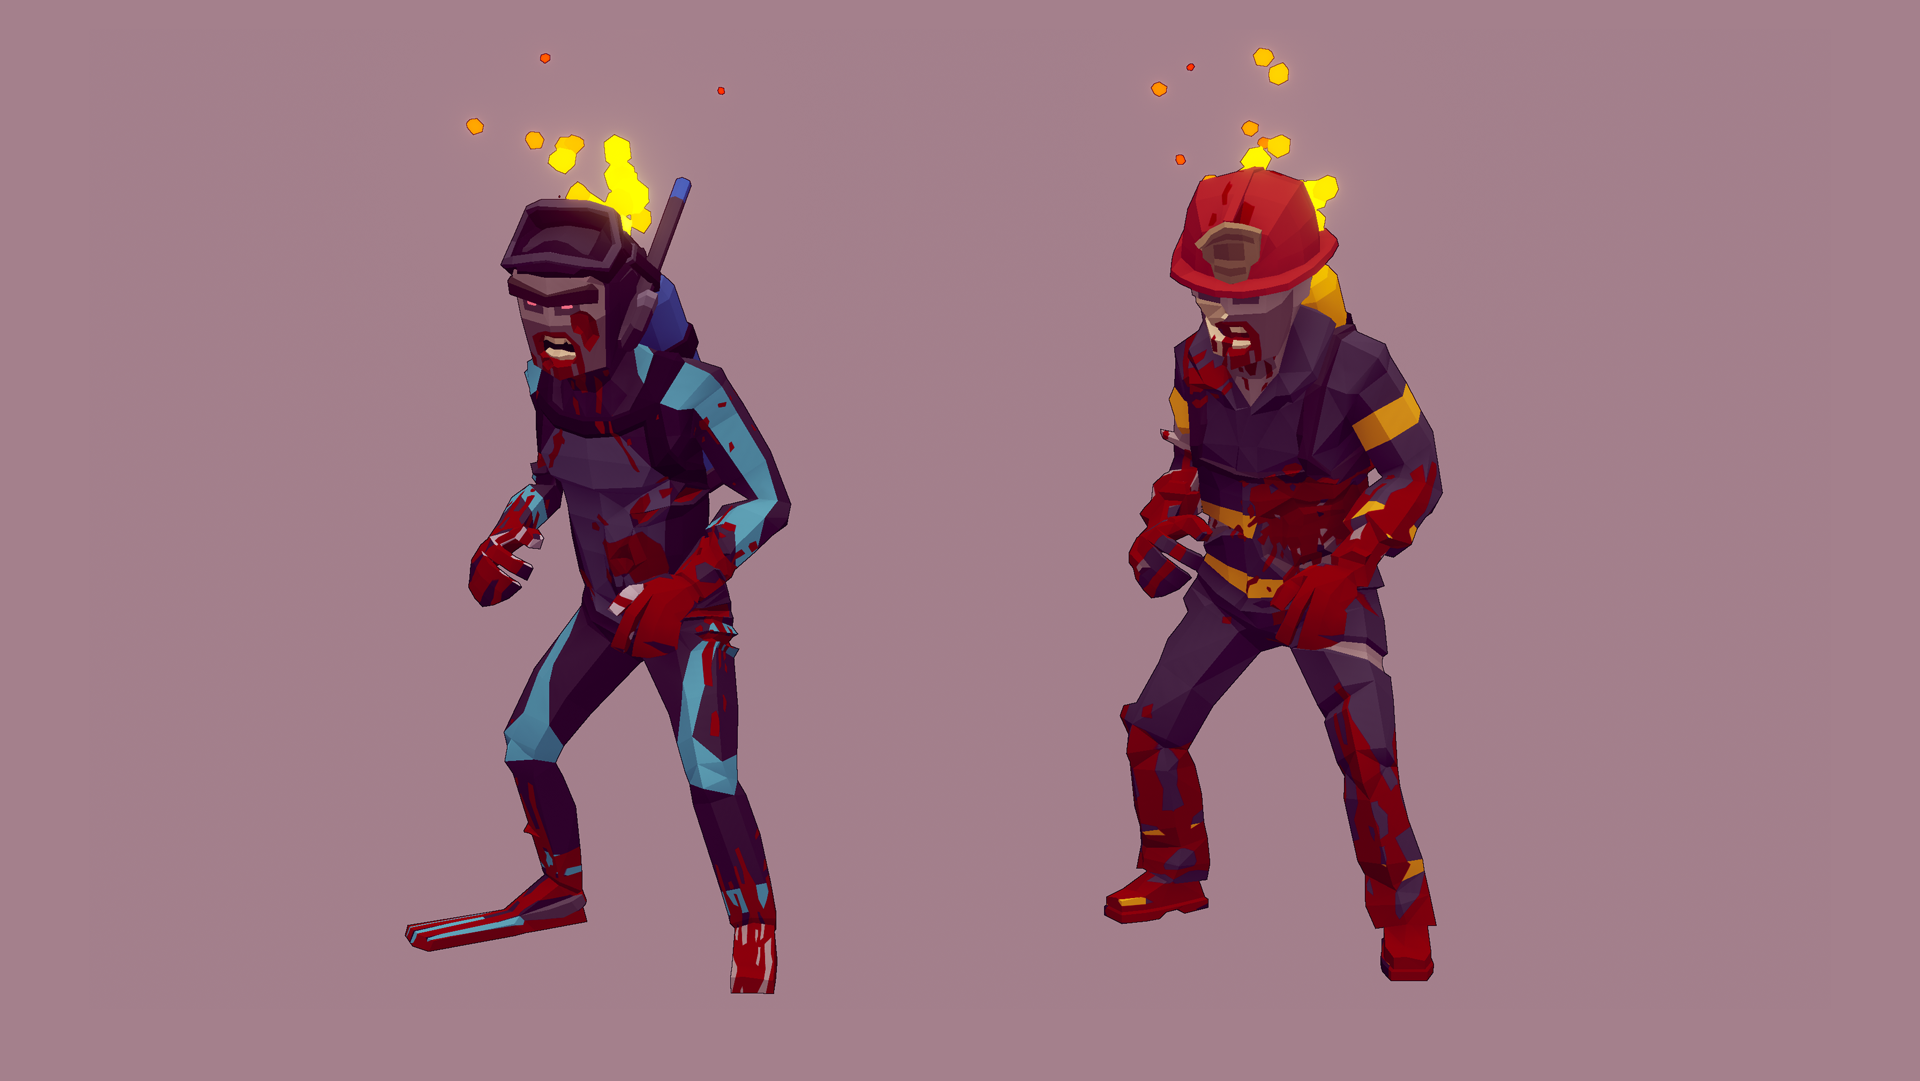 Scuba Diver and Firefighter